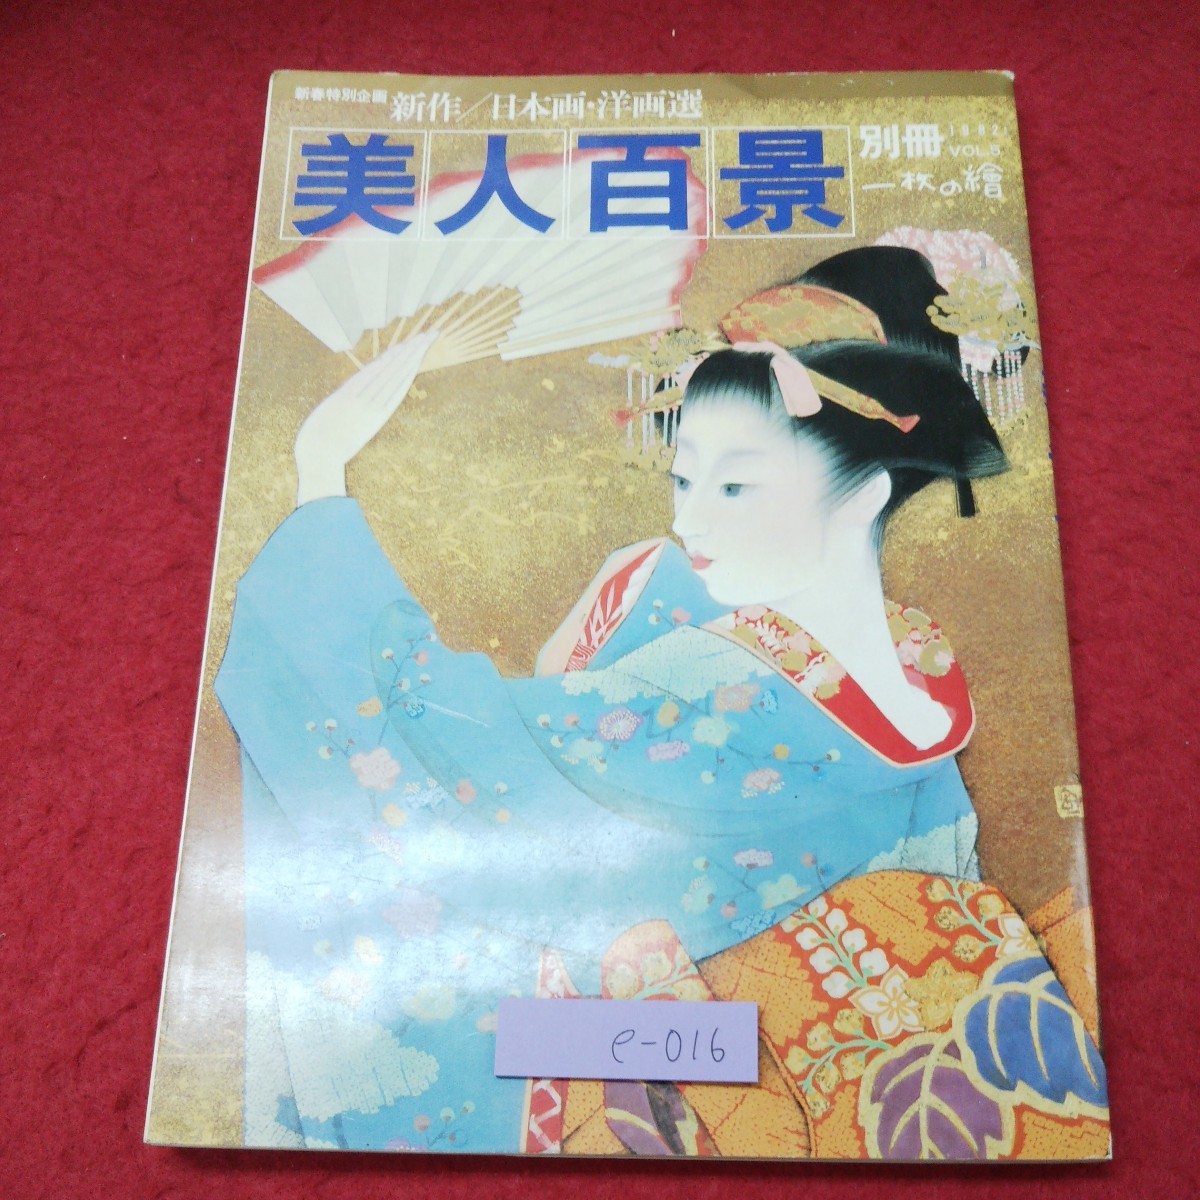 e-016 *9 beautiful person 100 . new work Japanese picture * Western films selection one sheets. . separate volume Showa era 57 year 1 month 1 day issue fine art art miscellaneous writings book of paintings in print work compilation picture ukiyoe Western films essay 